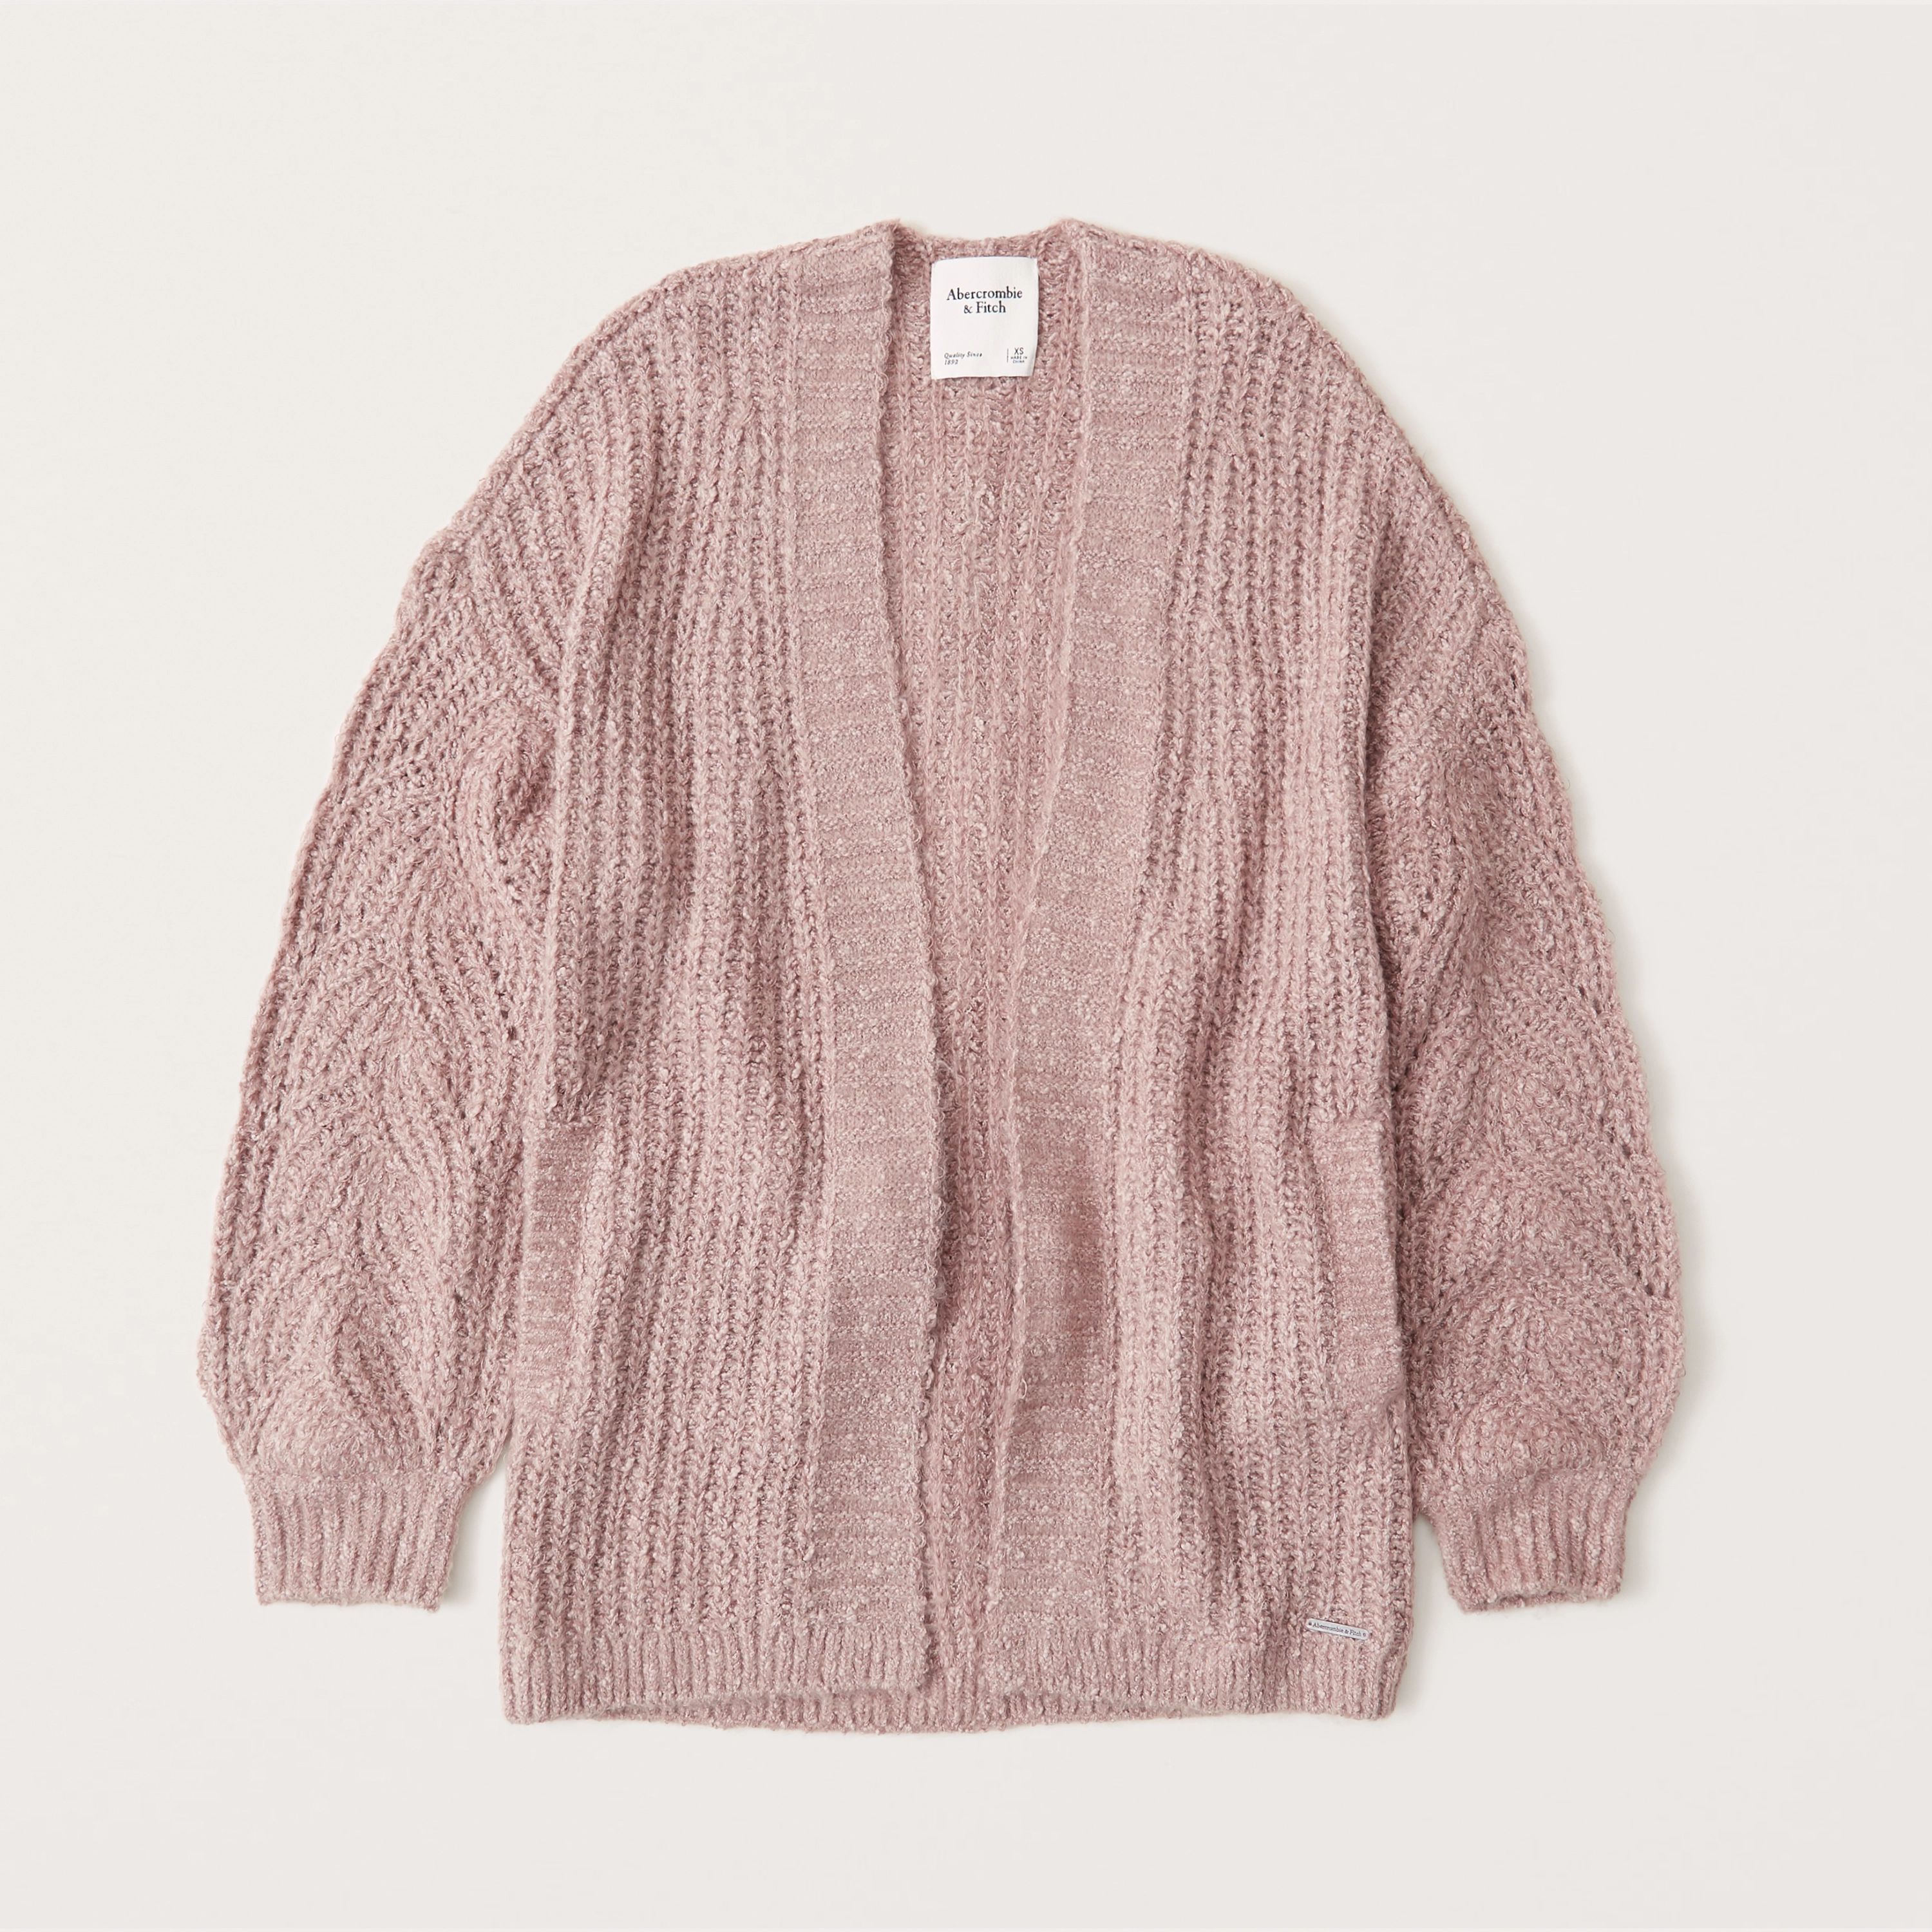 Women's Cable Knit Puff Sleeve Cardigan | Women's Tops | Abercrombie.com | Abercrombie & Fitch (US)